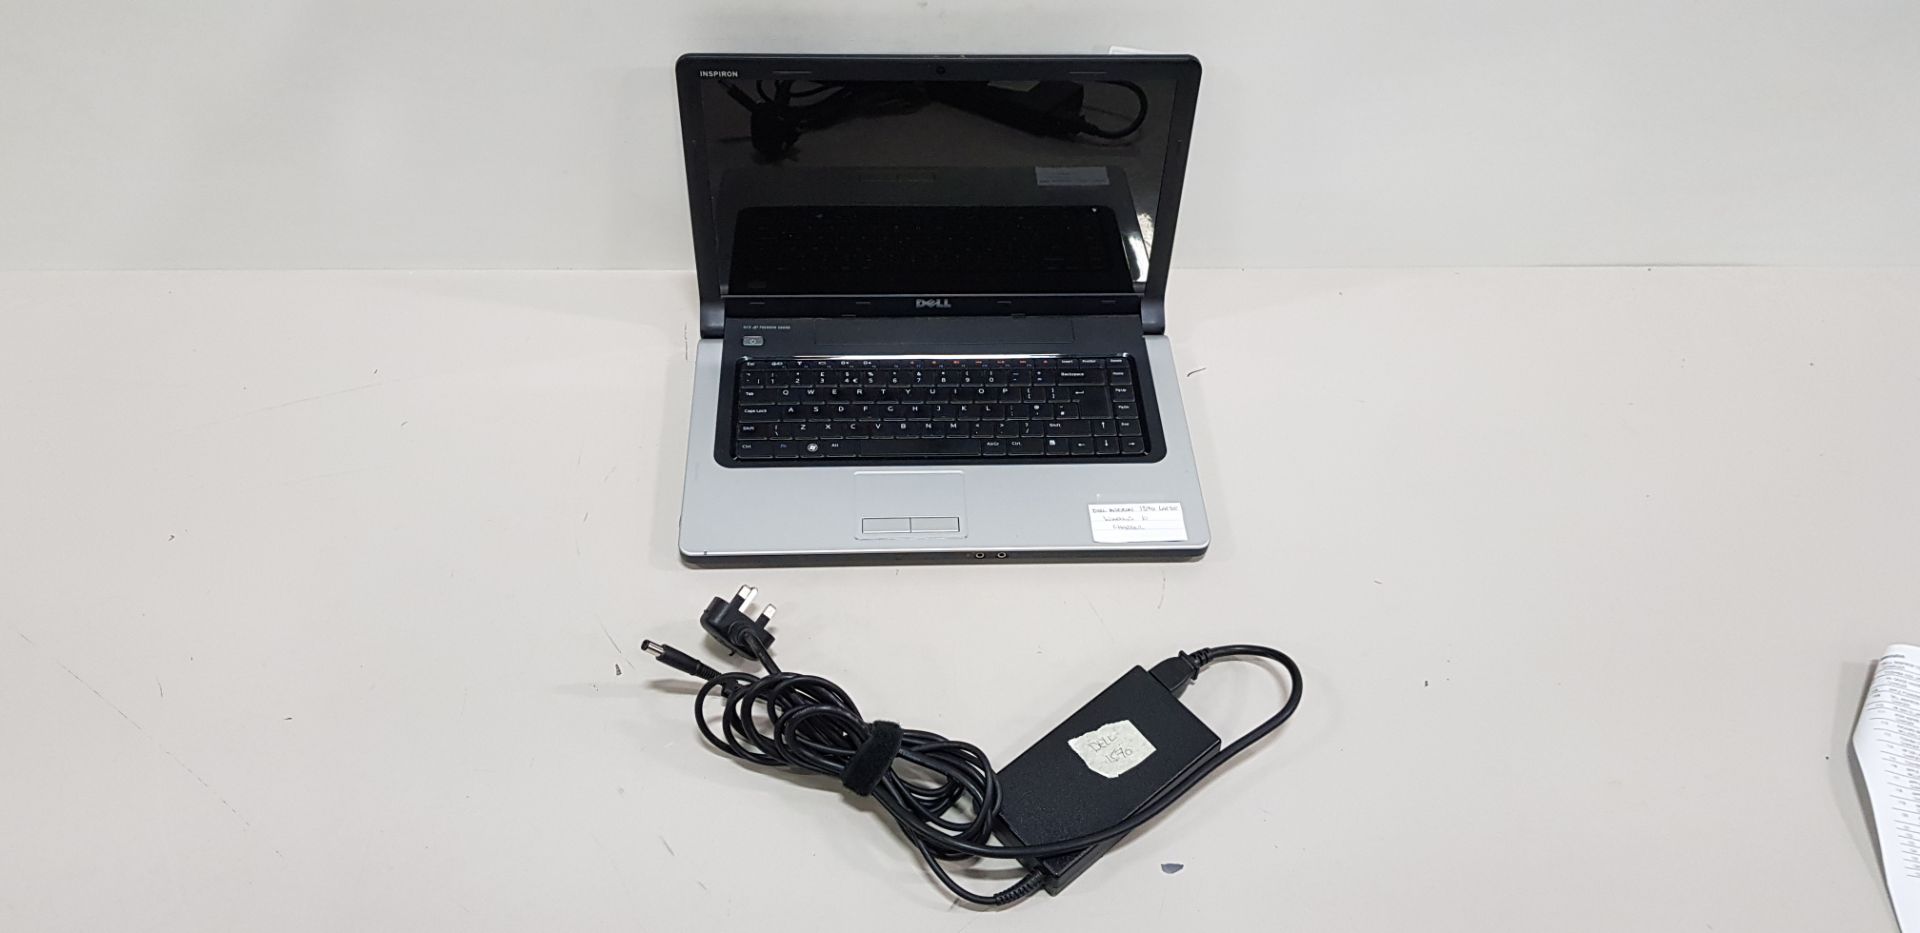 DELL INSPIRON 1570 LAPTOP WINDOWS 10 INCLUDES CHARGER